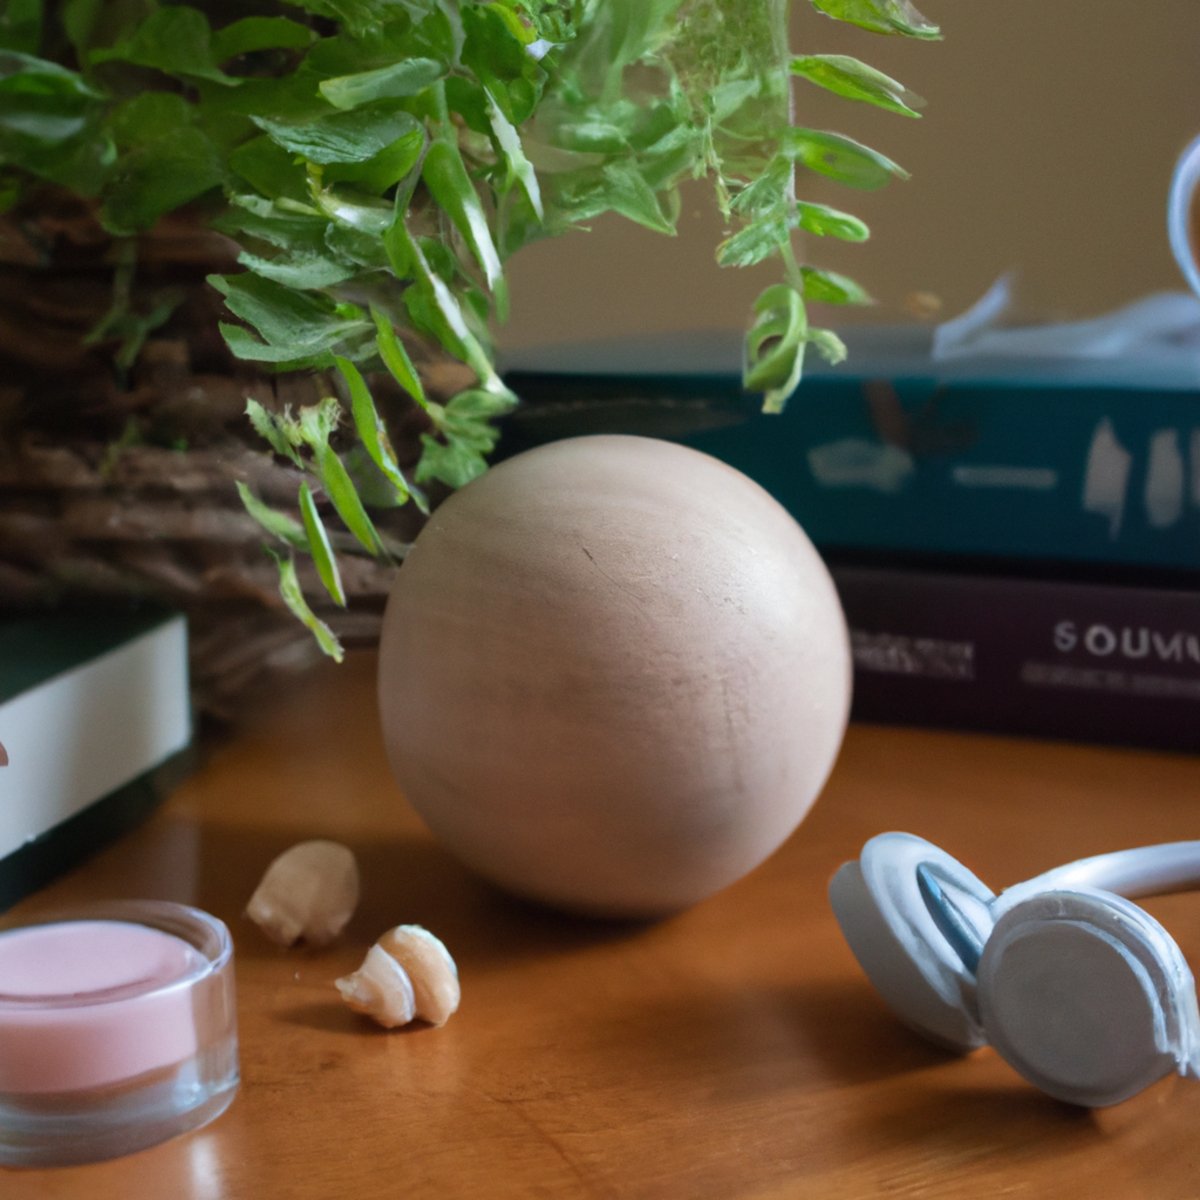 Stress Management Exercises For Relaxation - A calming scene of stress-relieving objects on a wooden table, including books, a diffuser, a stress ball, and a plant.